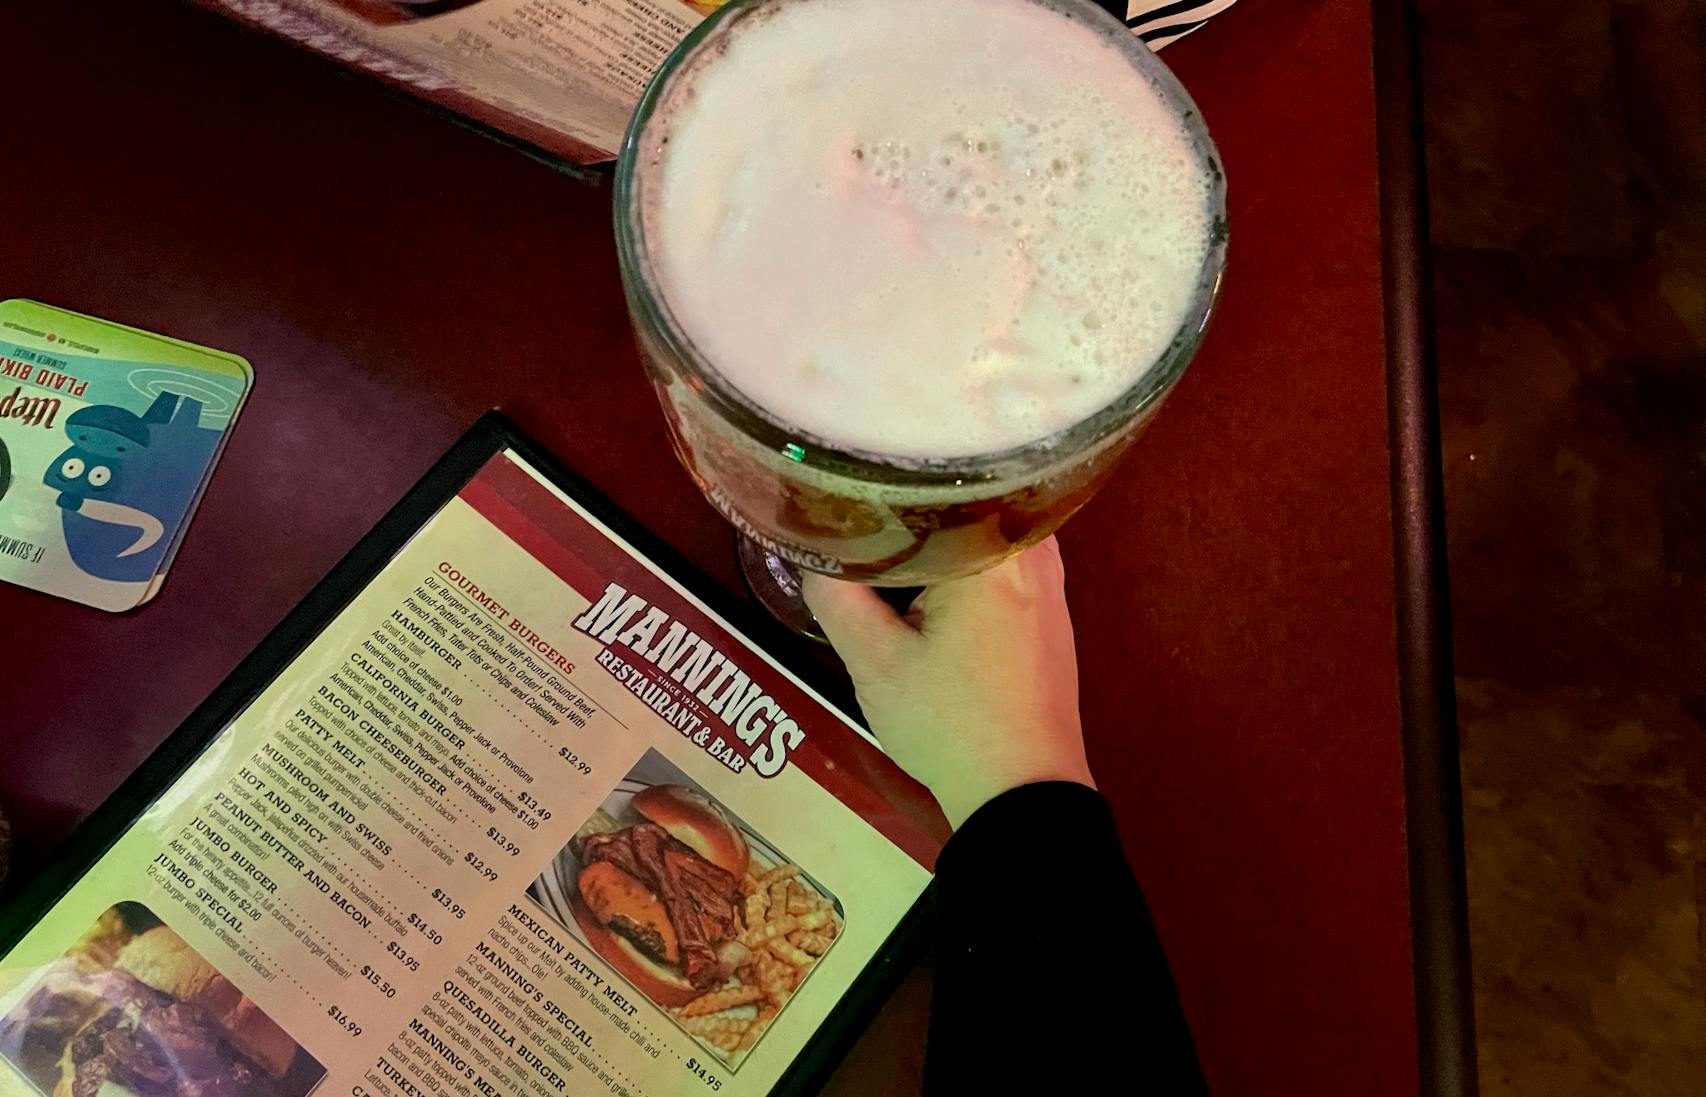 This salad bowl-sized schooner of beer cost $7 at Manning’s Cafe.